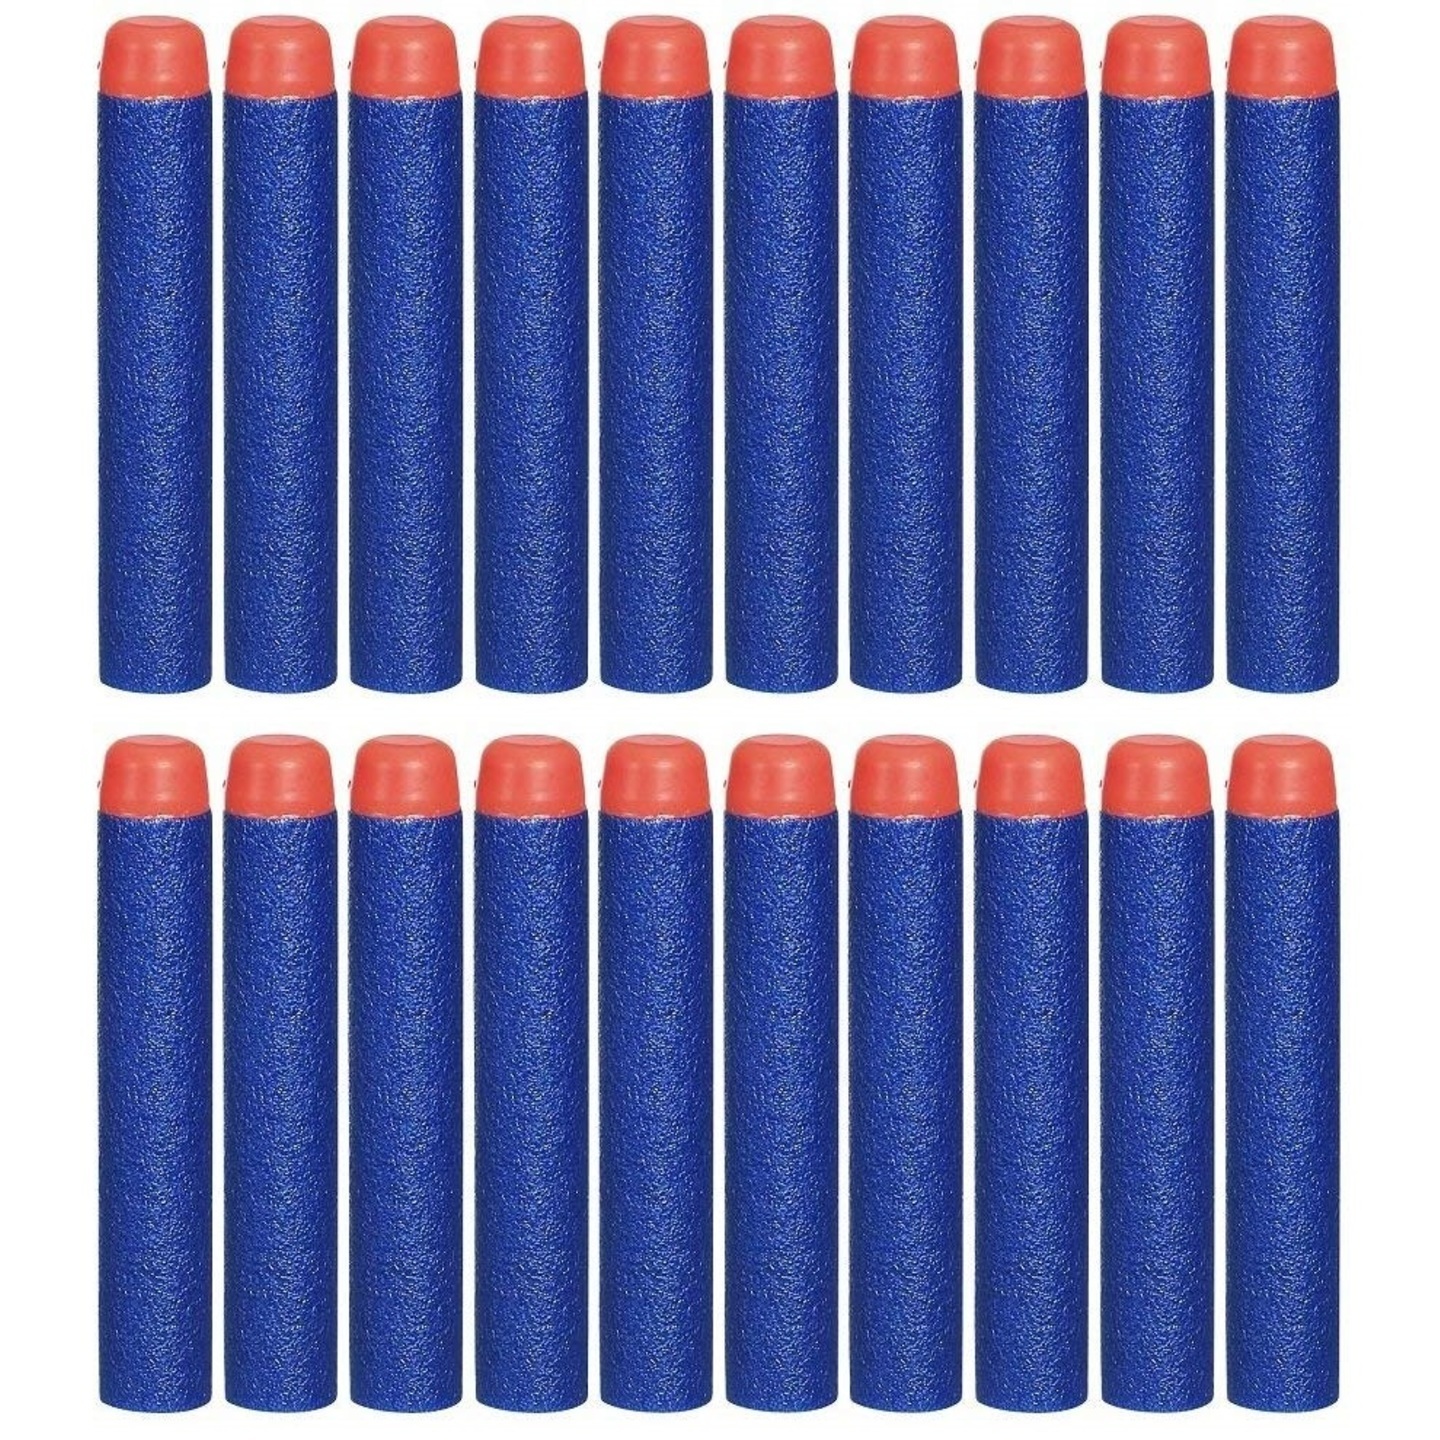 Replacement Darts for Nerf Guns 1 piece